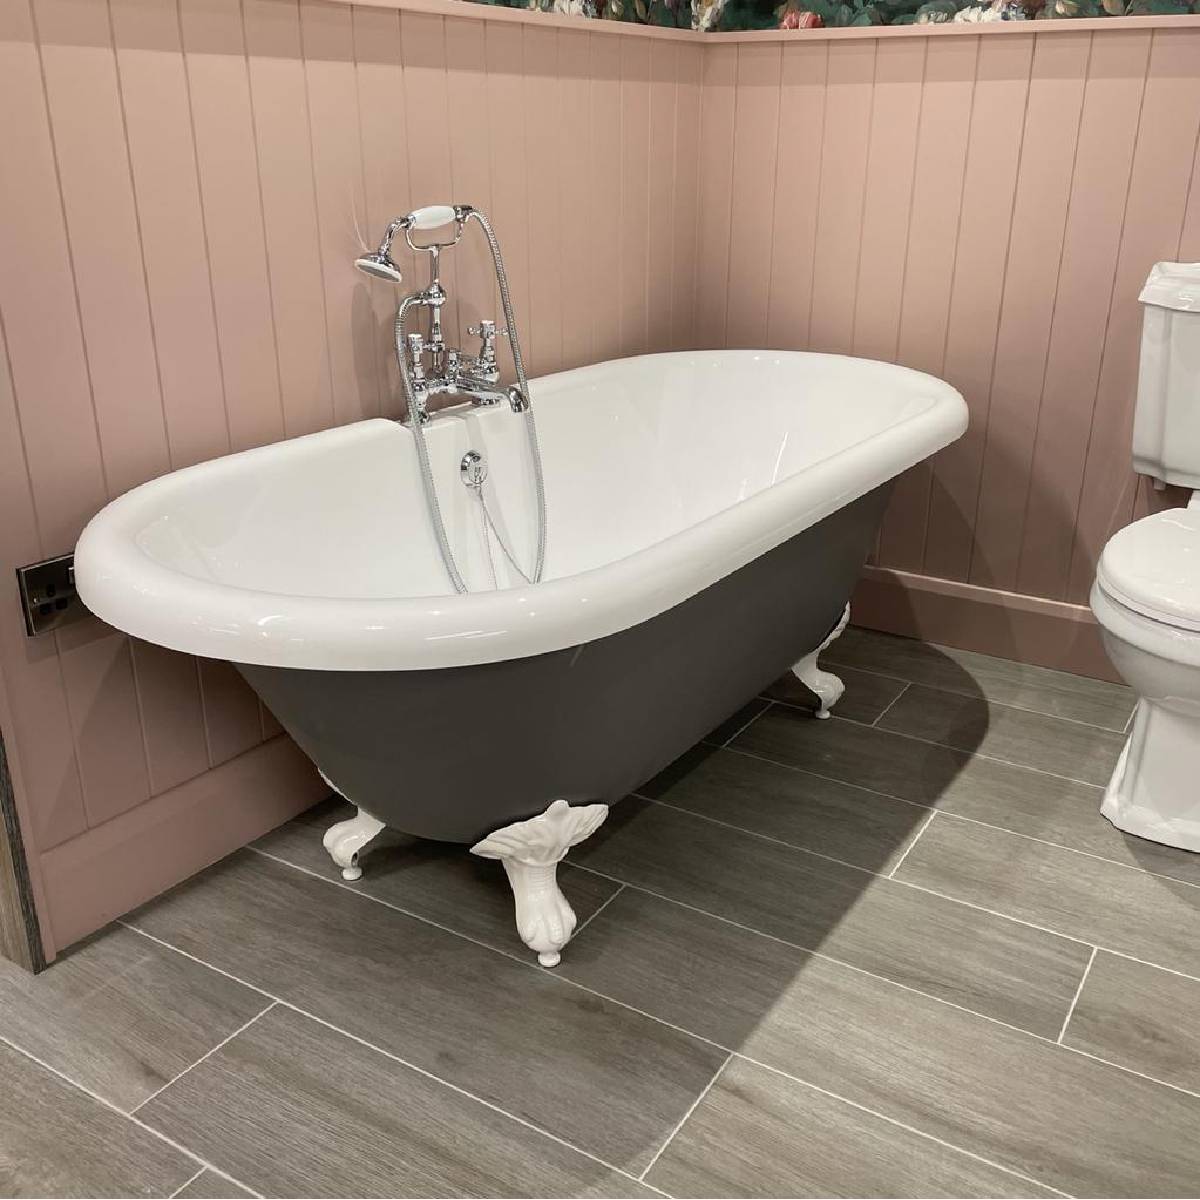 Balmoral 1700mm Double Ended Roll Top Bath with White Claw & Ball Feet - Dark Lead (12729)